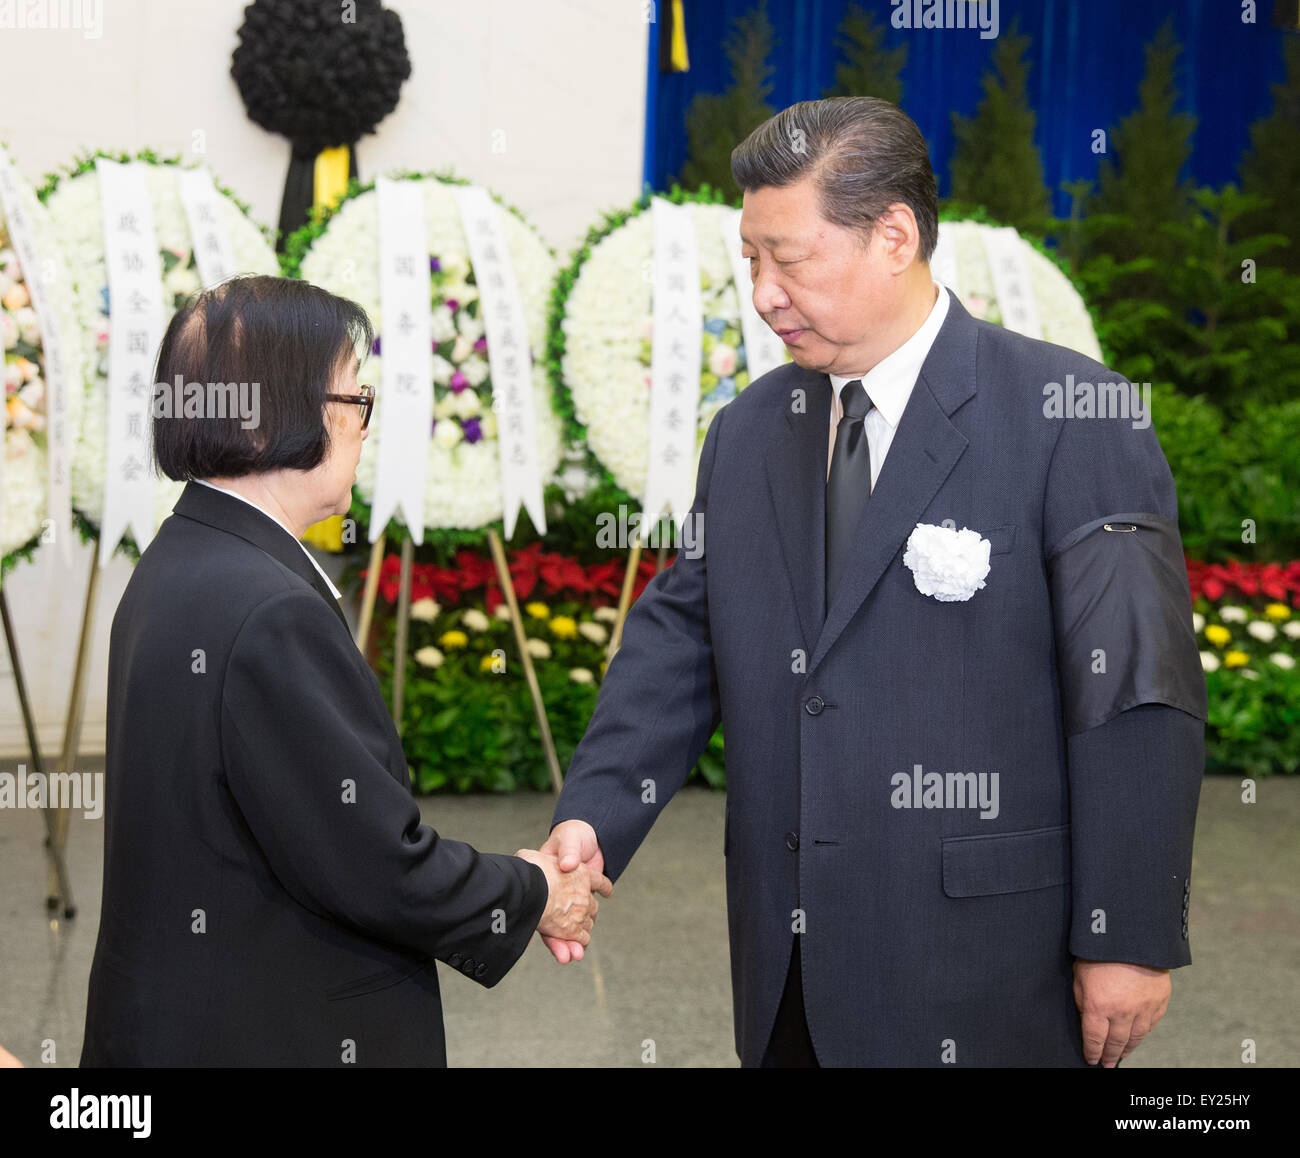 Beijing, China. 20th July, 2015. Chinese President Xi Jinping (R) shakes hands with a family member of Cheng Siwei, a renowned Chinese economist and former vice chairman of the Standing Committee of China's National People's Congress, at Cheng's funeral at Babaoshan Revolutionary Cemetery in Beijing, capital of China, July 20, 2015. Chinese top leaders Xi Jinping, Li Keqiang, Zhang Dejiang, Yu Zhengsheng, Liu Yunshan, Wang Qishan and Zhang Gaoli, attended the funeral here on Monday morning. Credit:  Huang Jingwen/Xinhua/Alamy Live News Stock Photo